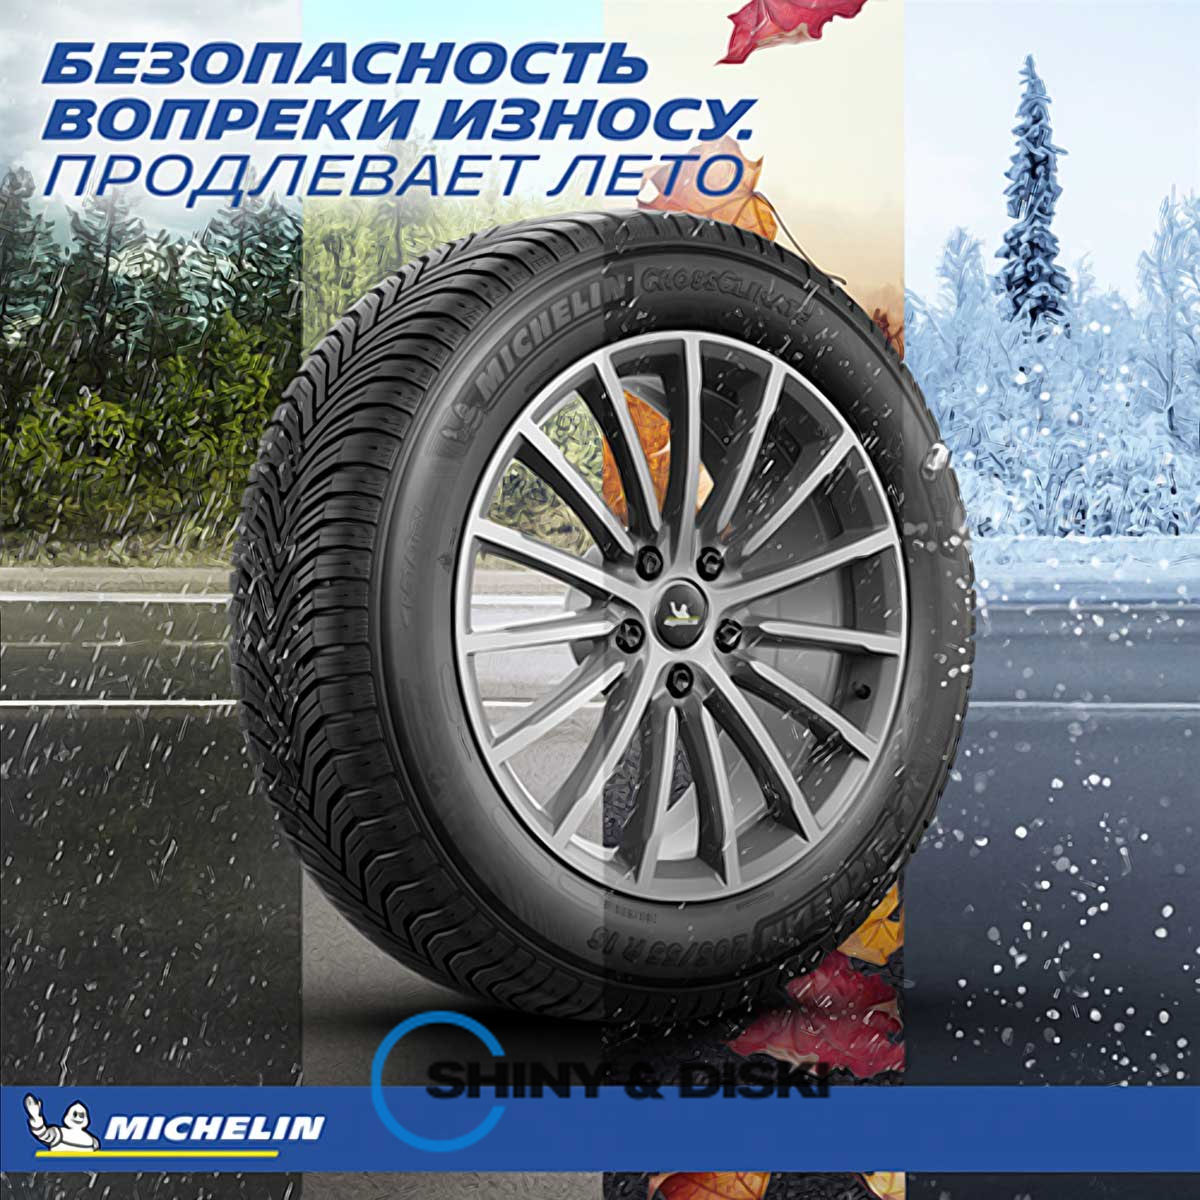 покрышки michelin cross climate+ 165/70 r14 85t xl